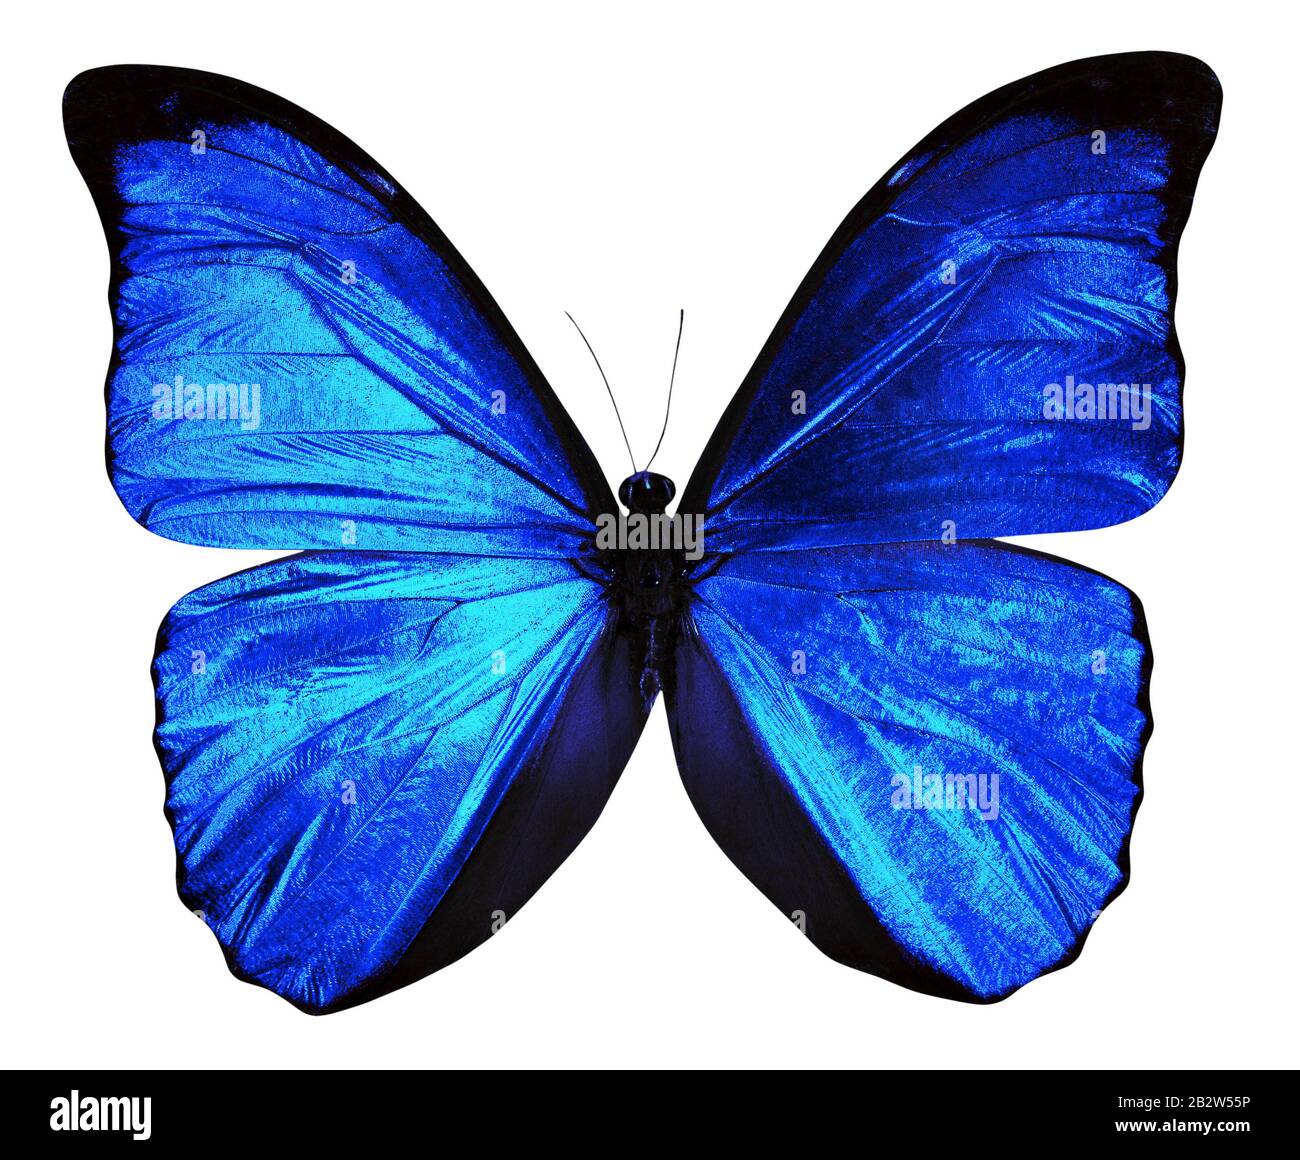 blue butterfly Morpho menelaus isolated on a white background. Stock Photo